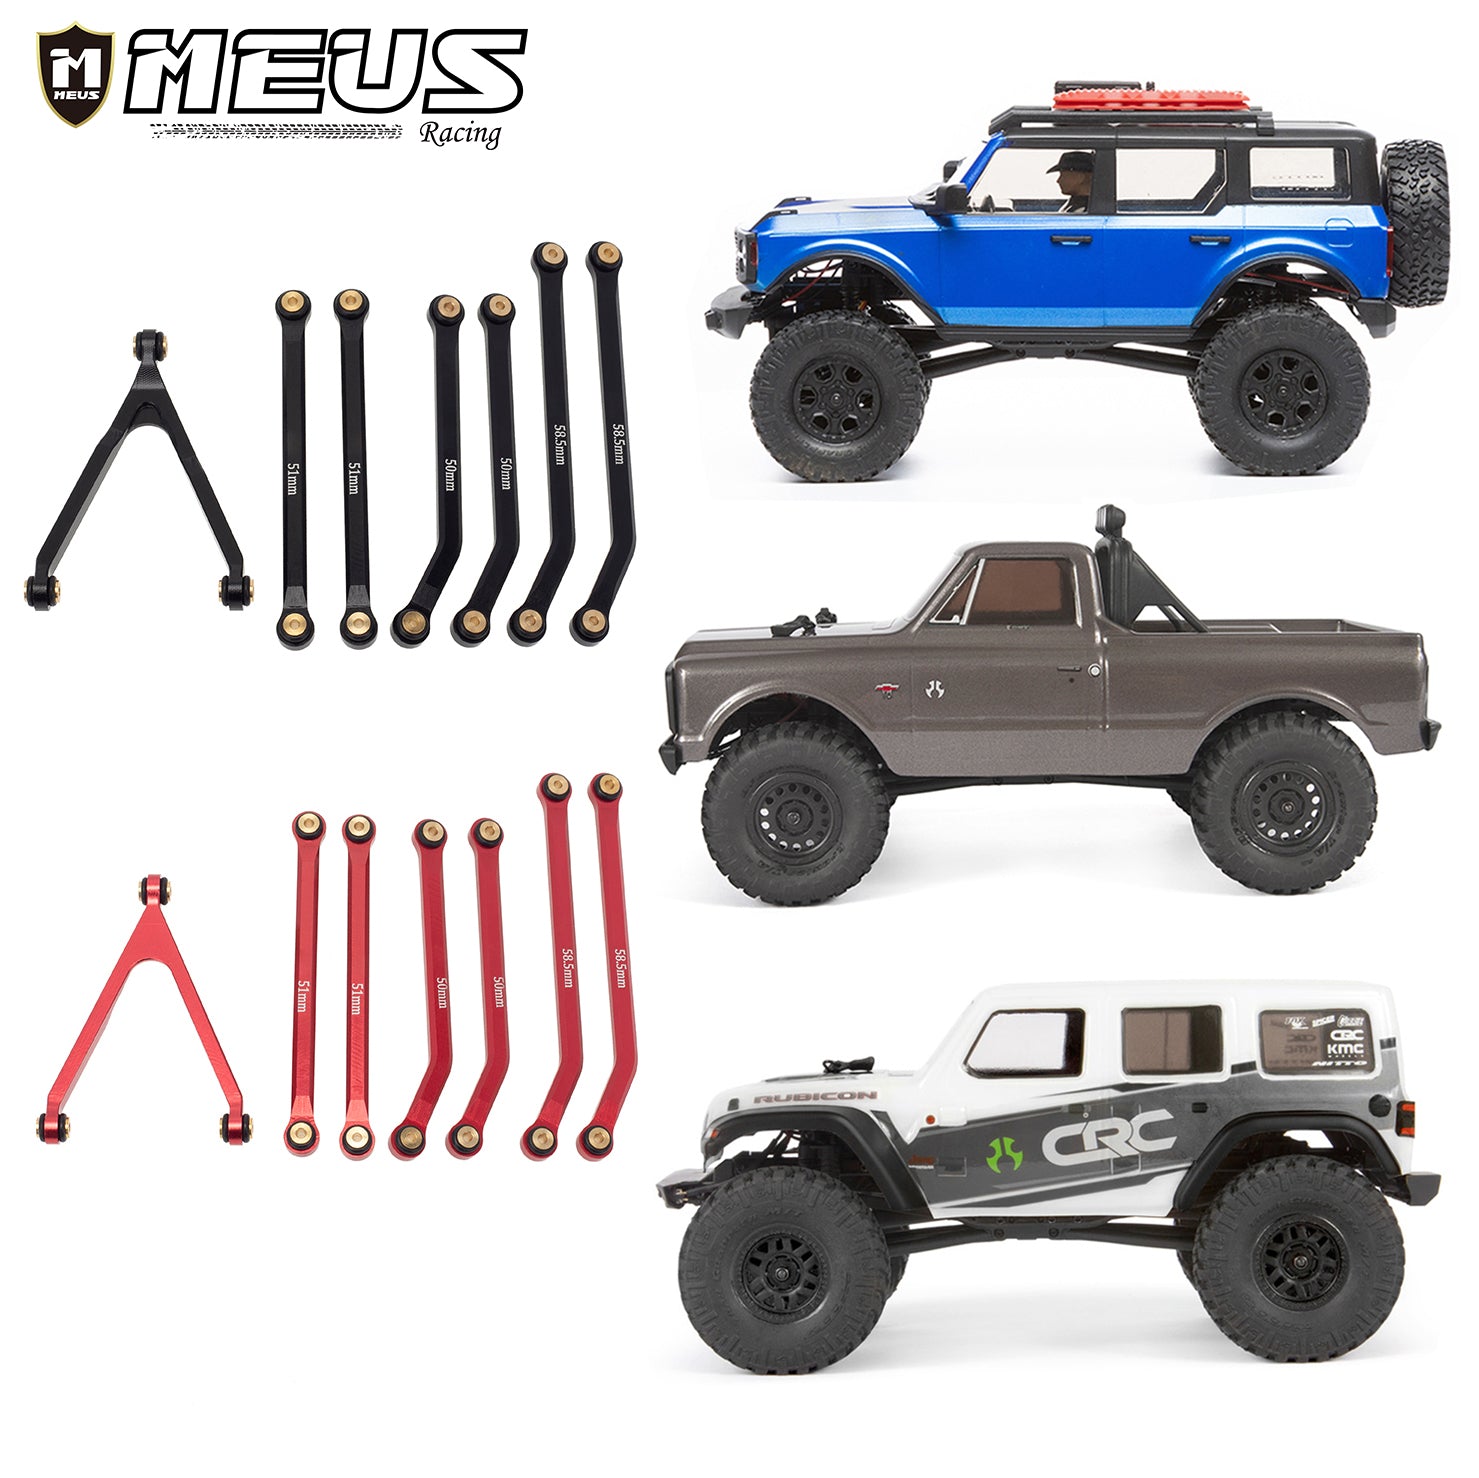 MEUS Racing Link Rod for RC Vehicles